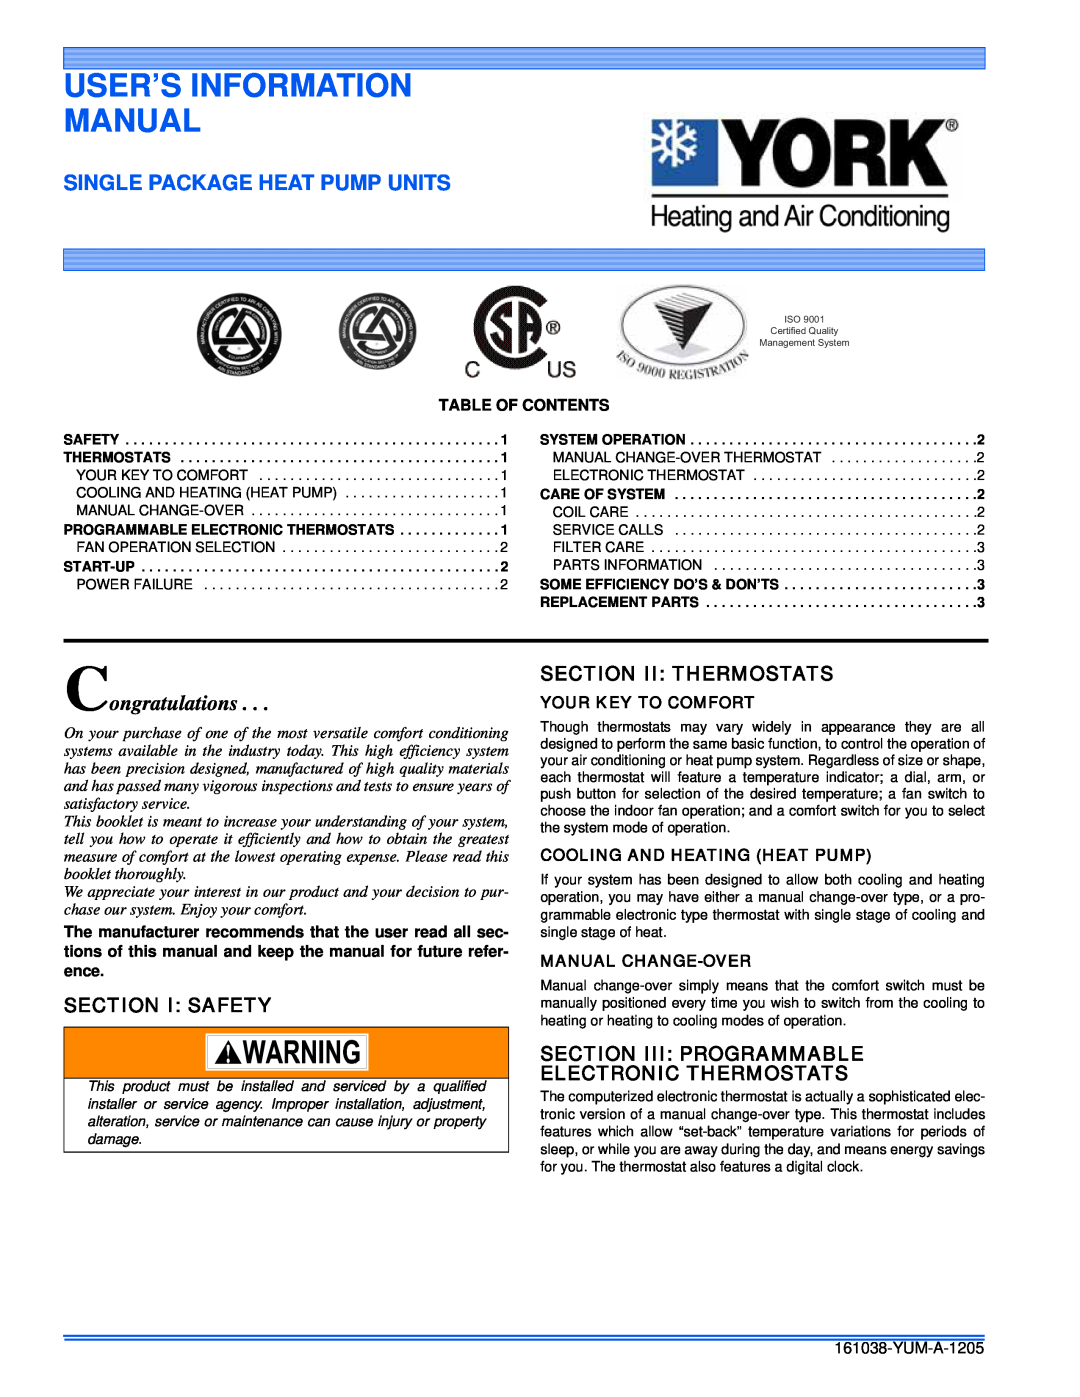 York 161038-YUM-A-1205 manual Section I Safety, Section Ii Thermostats, Section Iii: Programmable Electronic Thermostats 